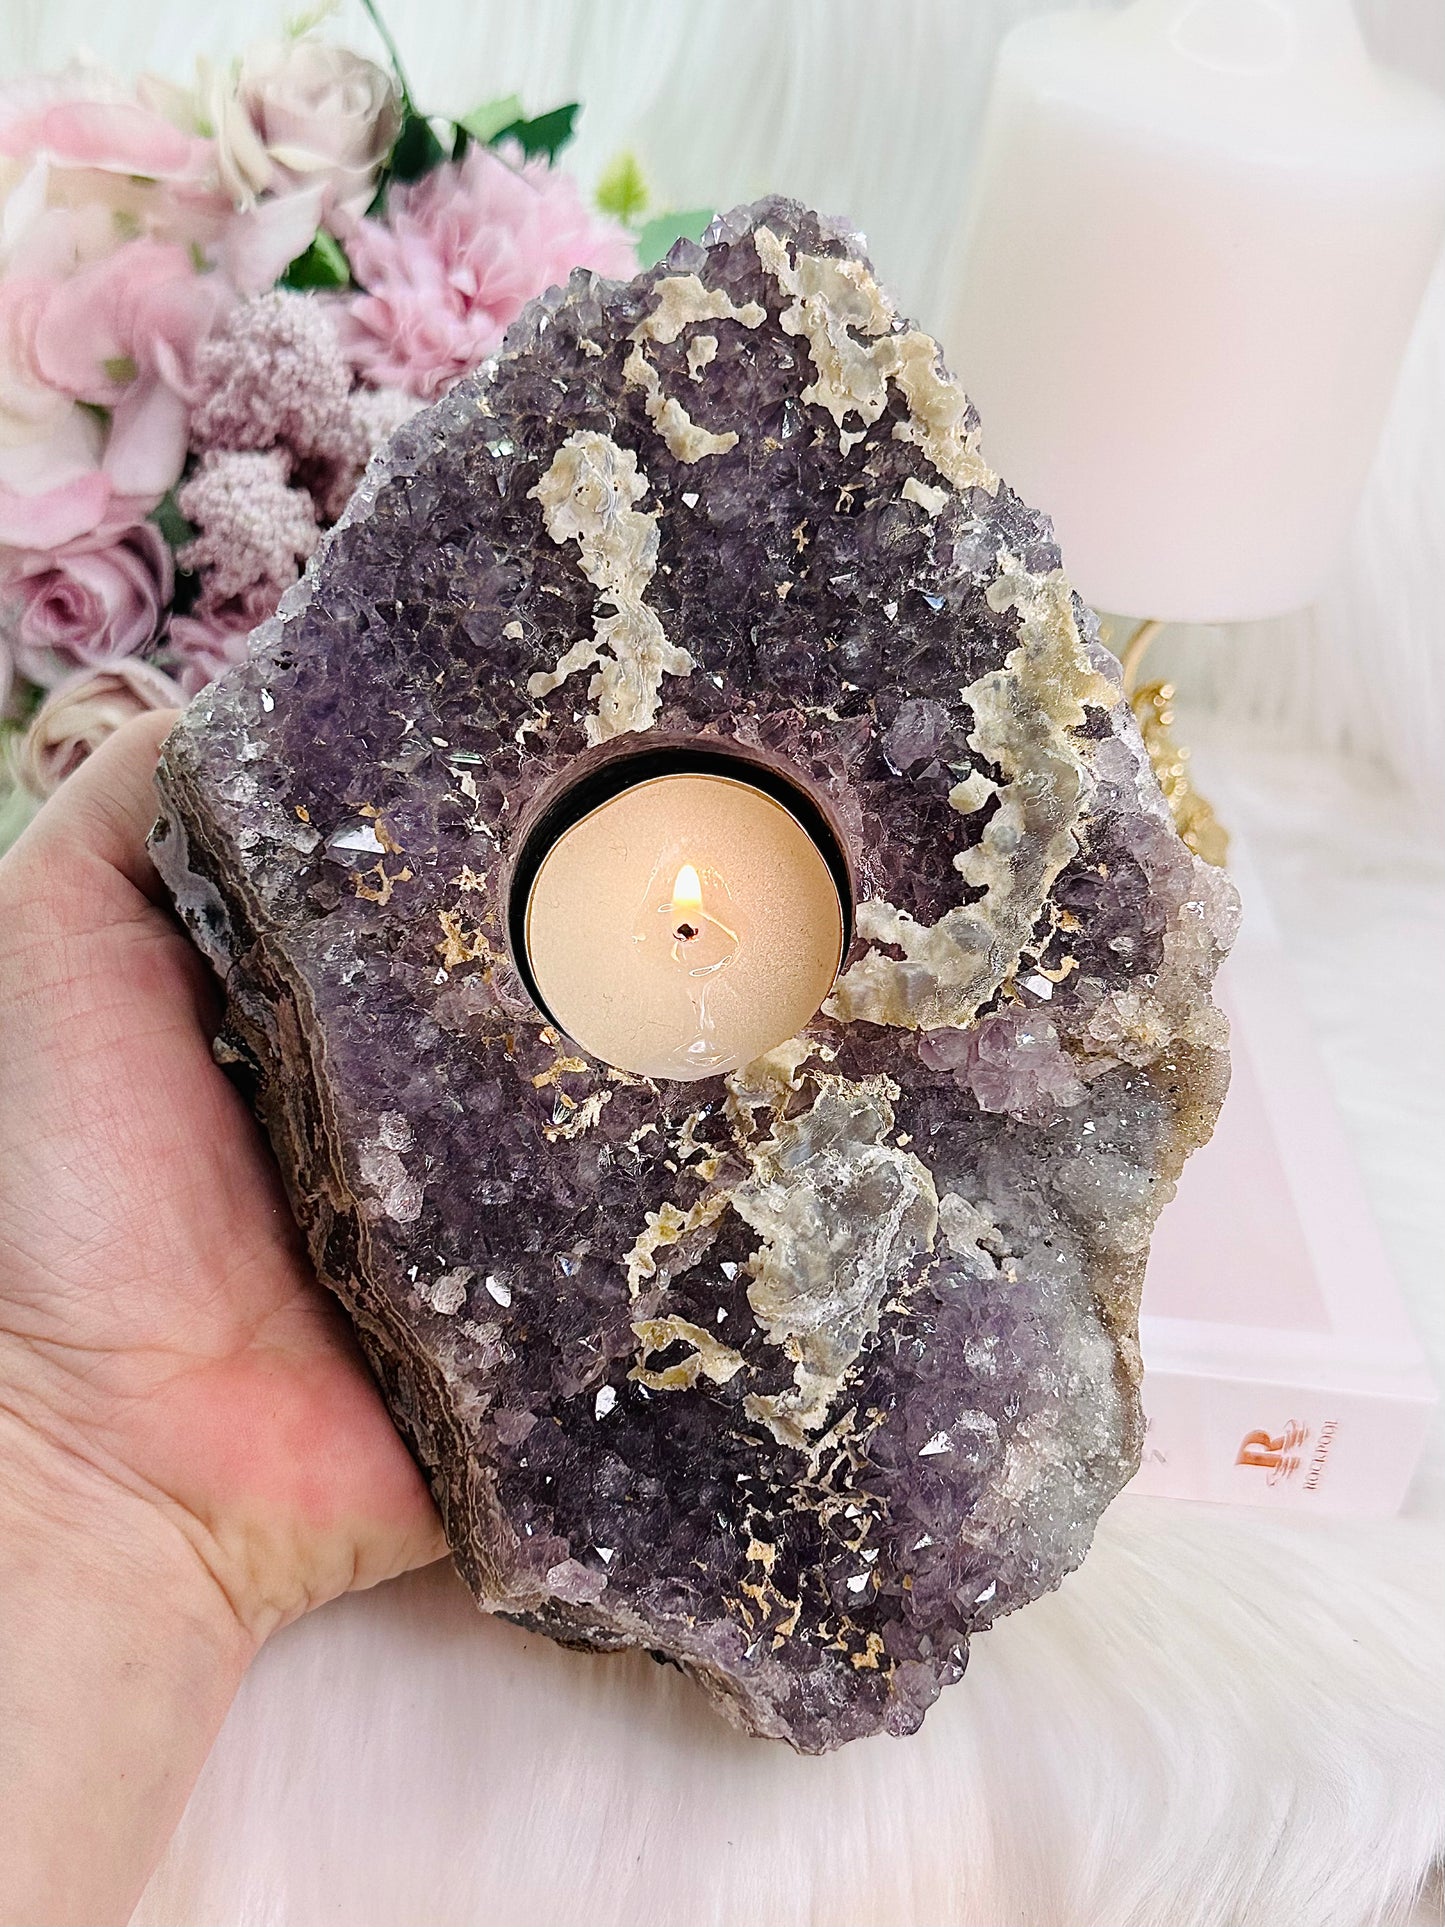 Stunning Large 1.26KG Amethyst Cluster Candle Holder With Gorgeous Calcite Inclusions From Brazil